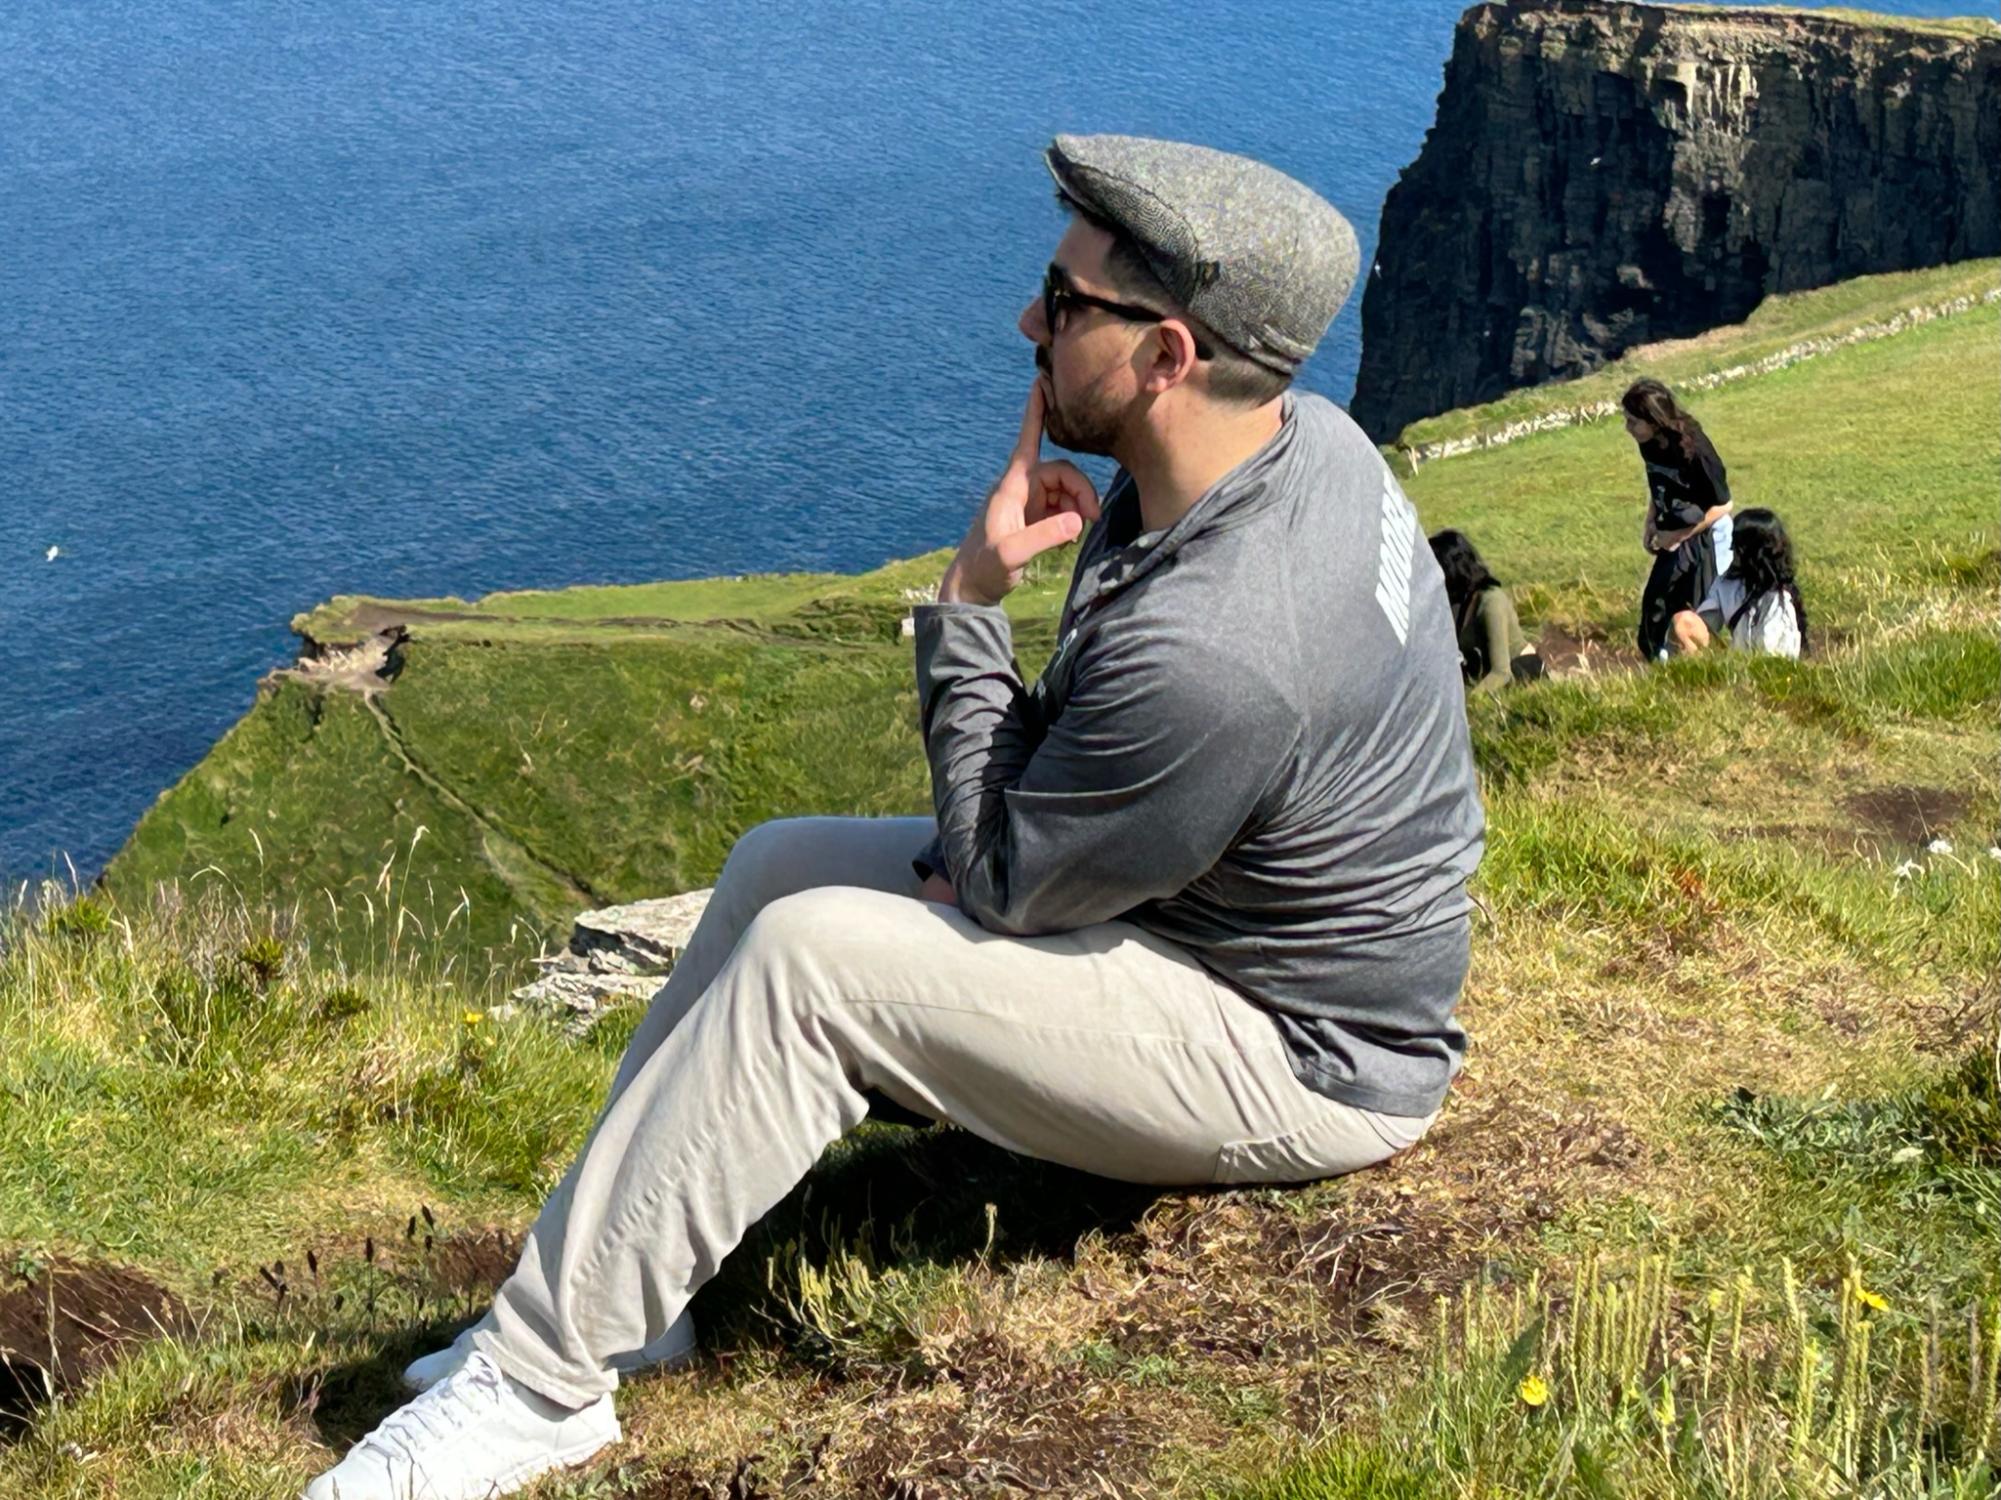 Choir Director Mr. Moore ponders his life choices while viewing the open water at the Cliffs of Moher. Used with permission/Penny Mouse.